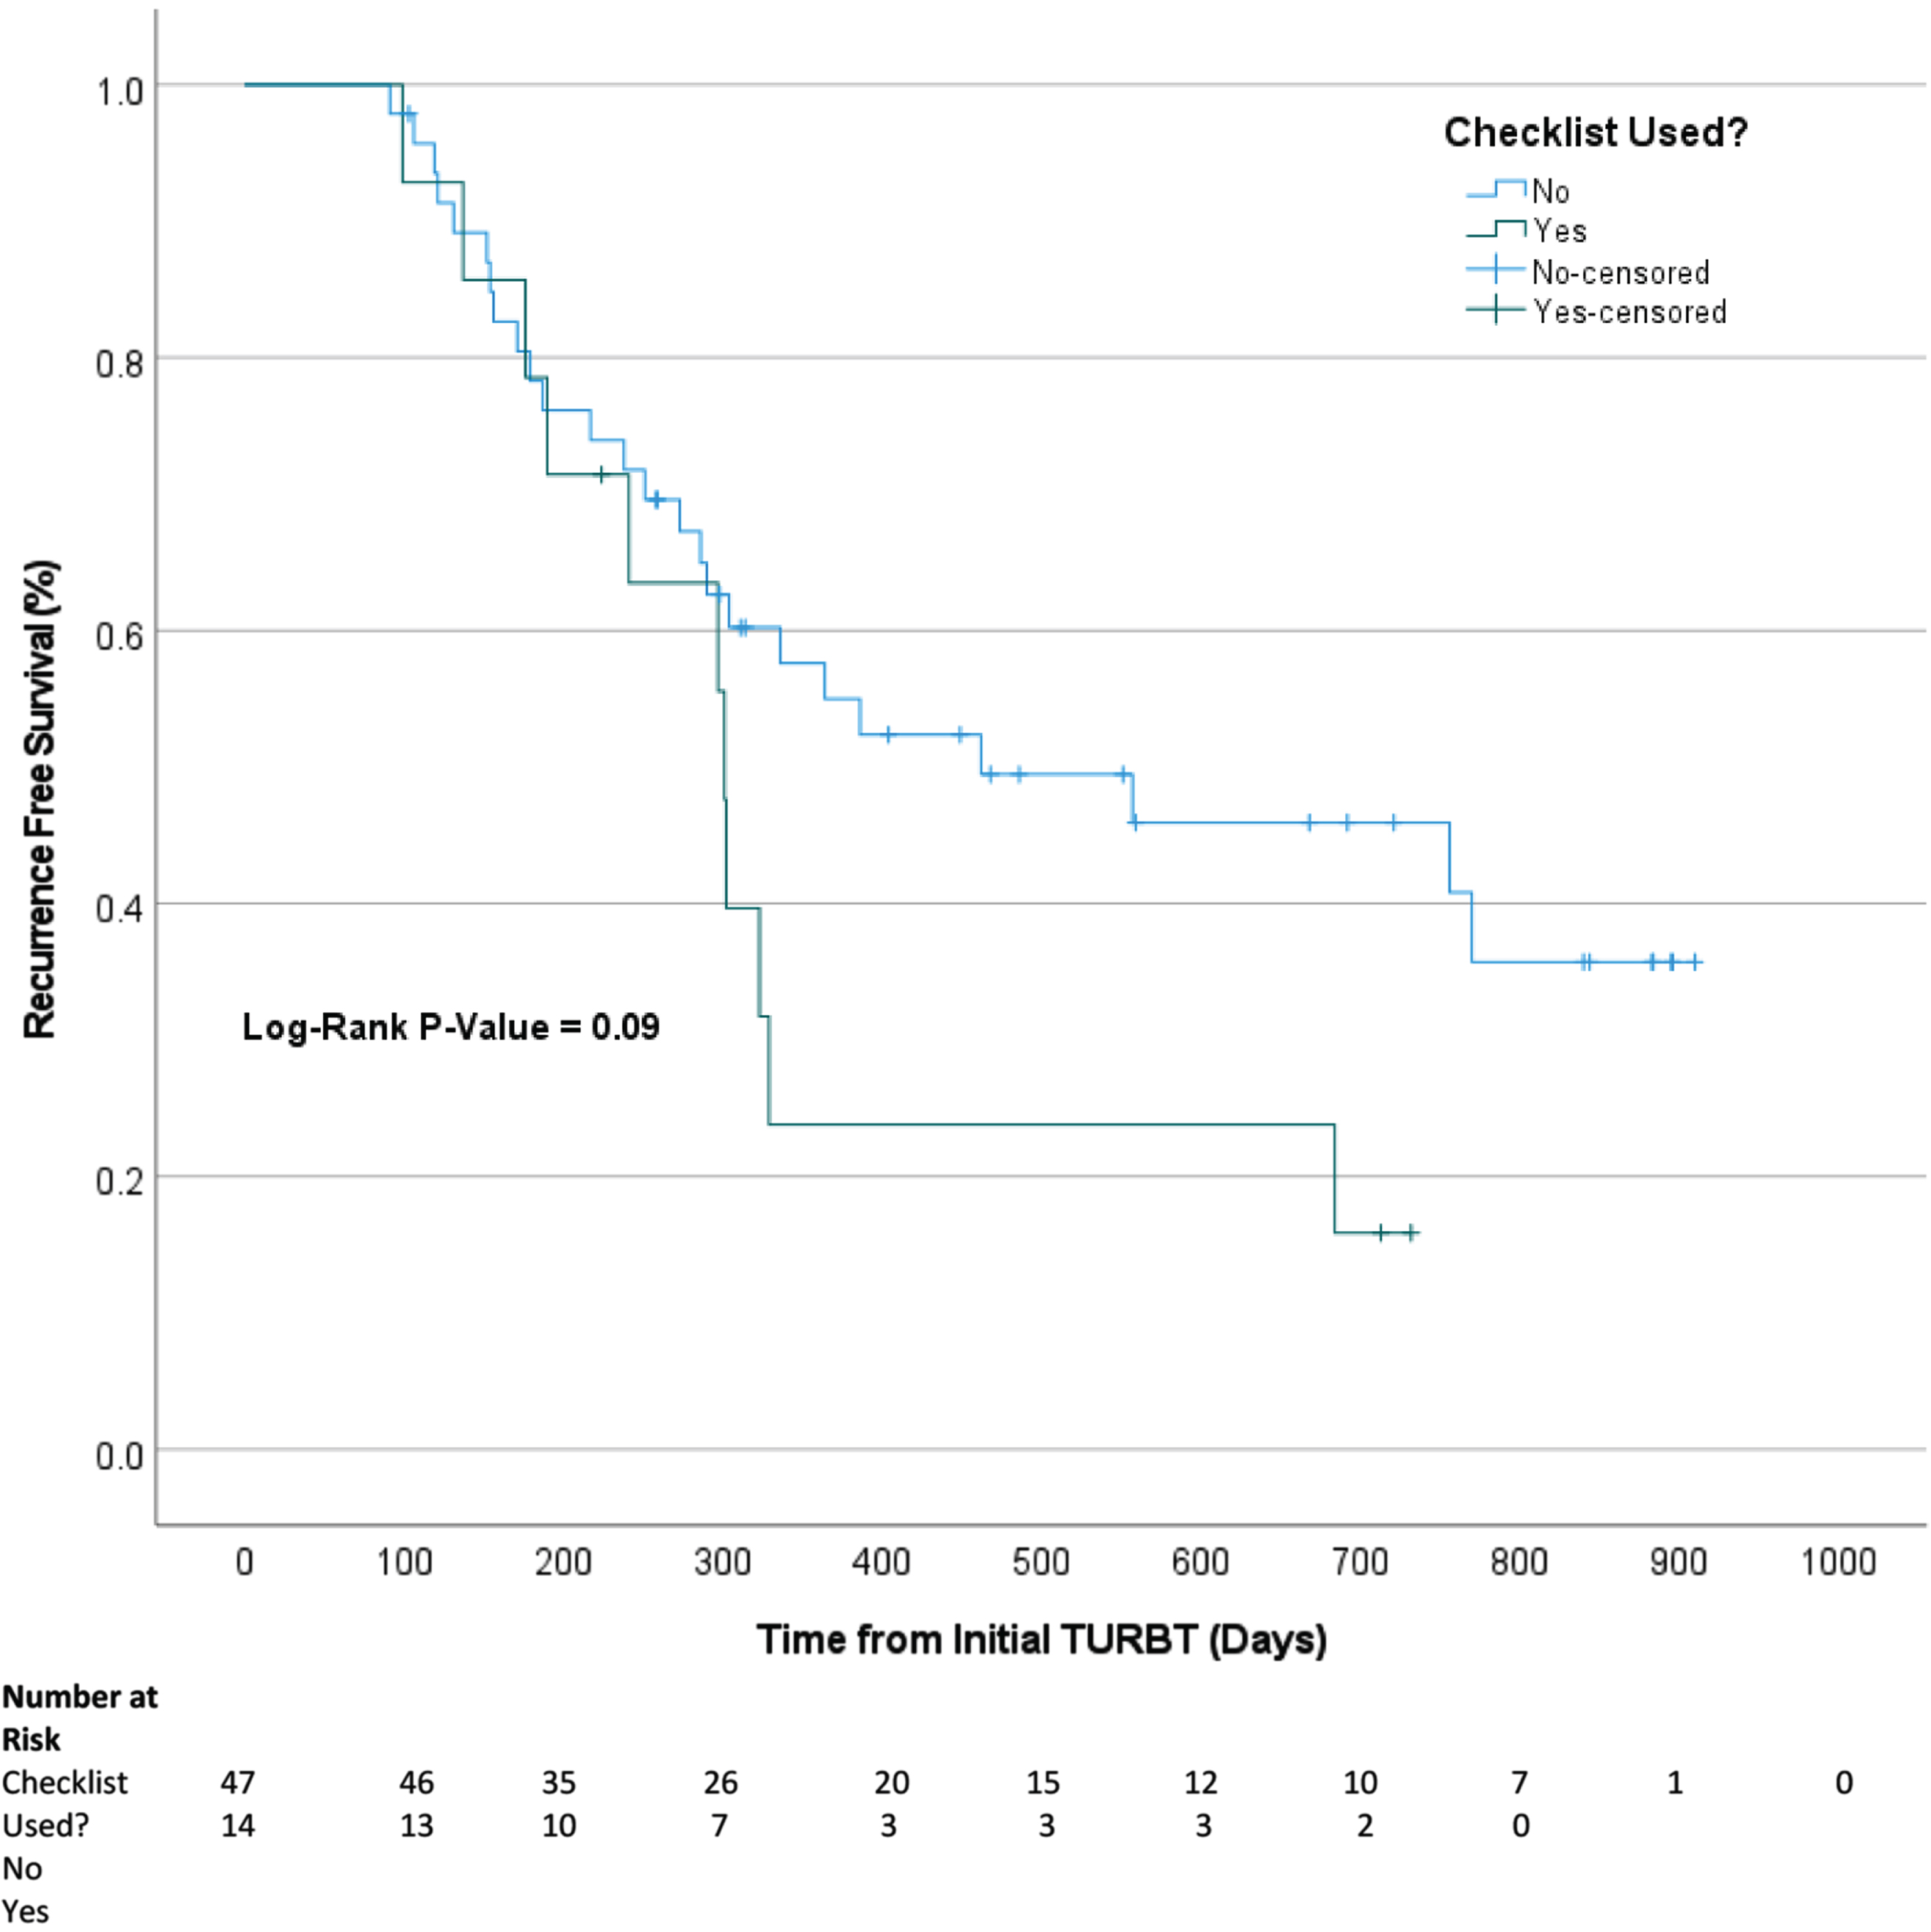 Kaplan-Meier curve comparing the effect of checklist use (no vs. yes) at diagnosis on time to tumor recurrence for new patients.